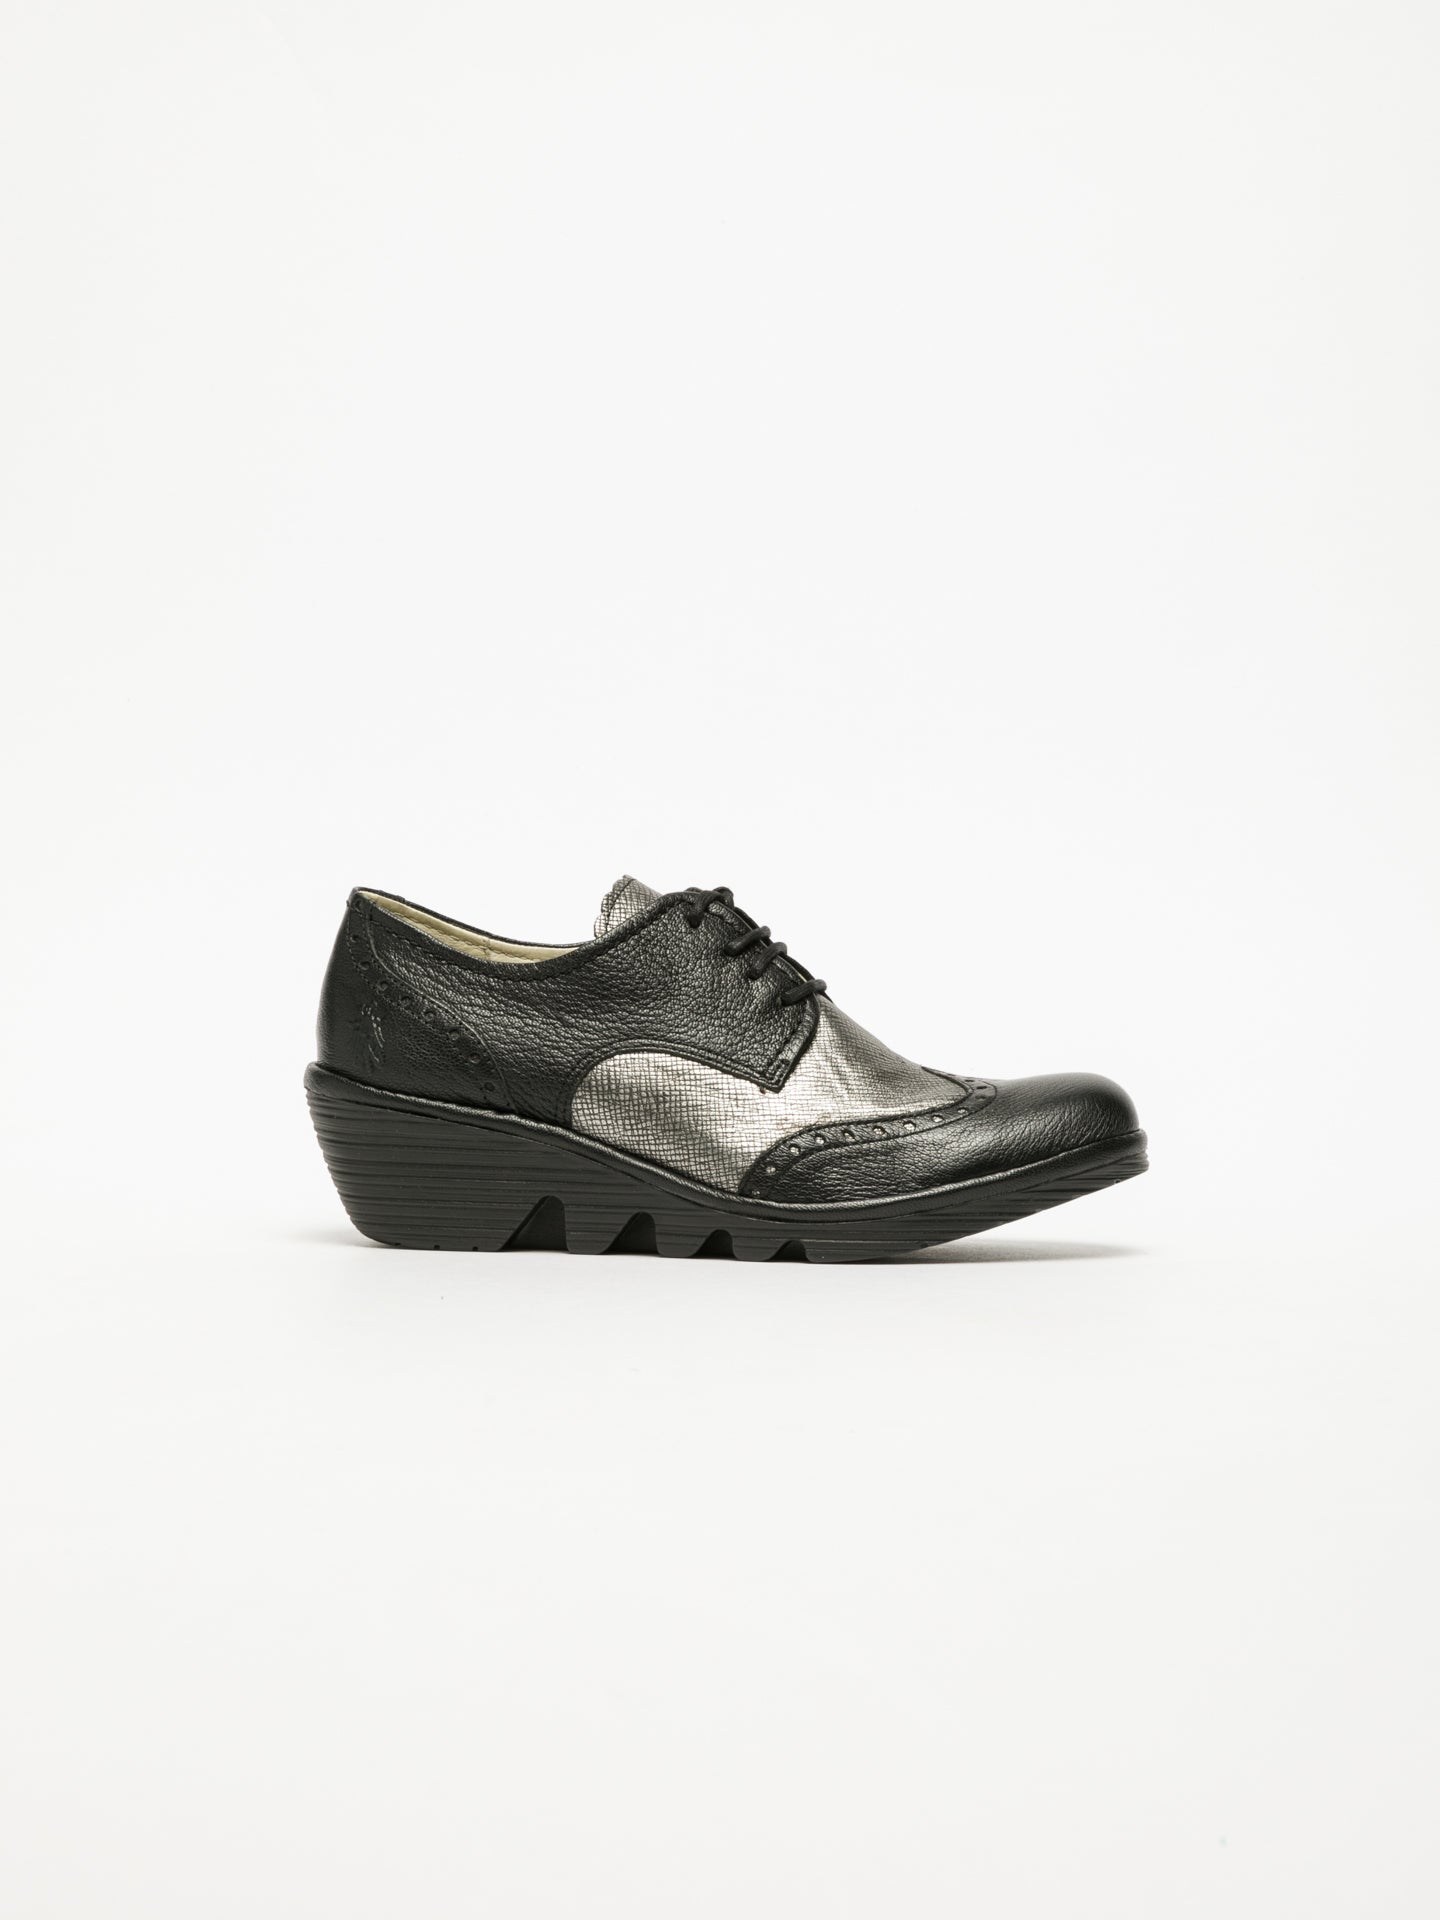 Fly London Coal Black Derby Shoes